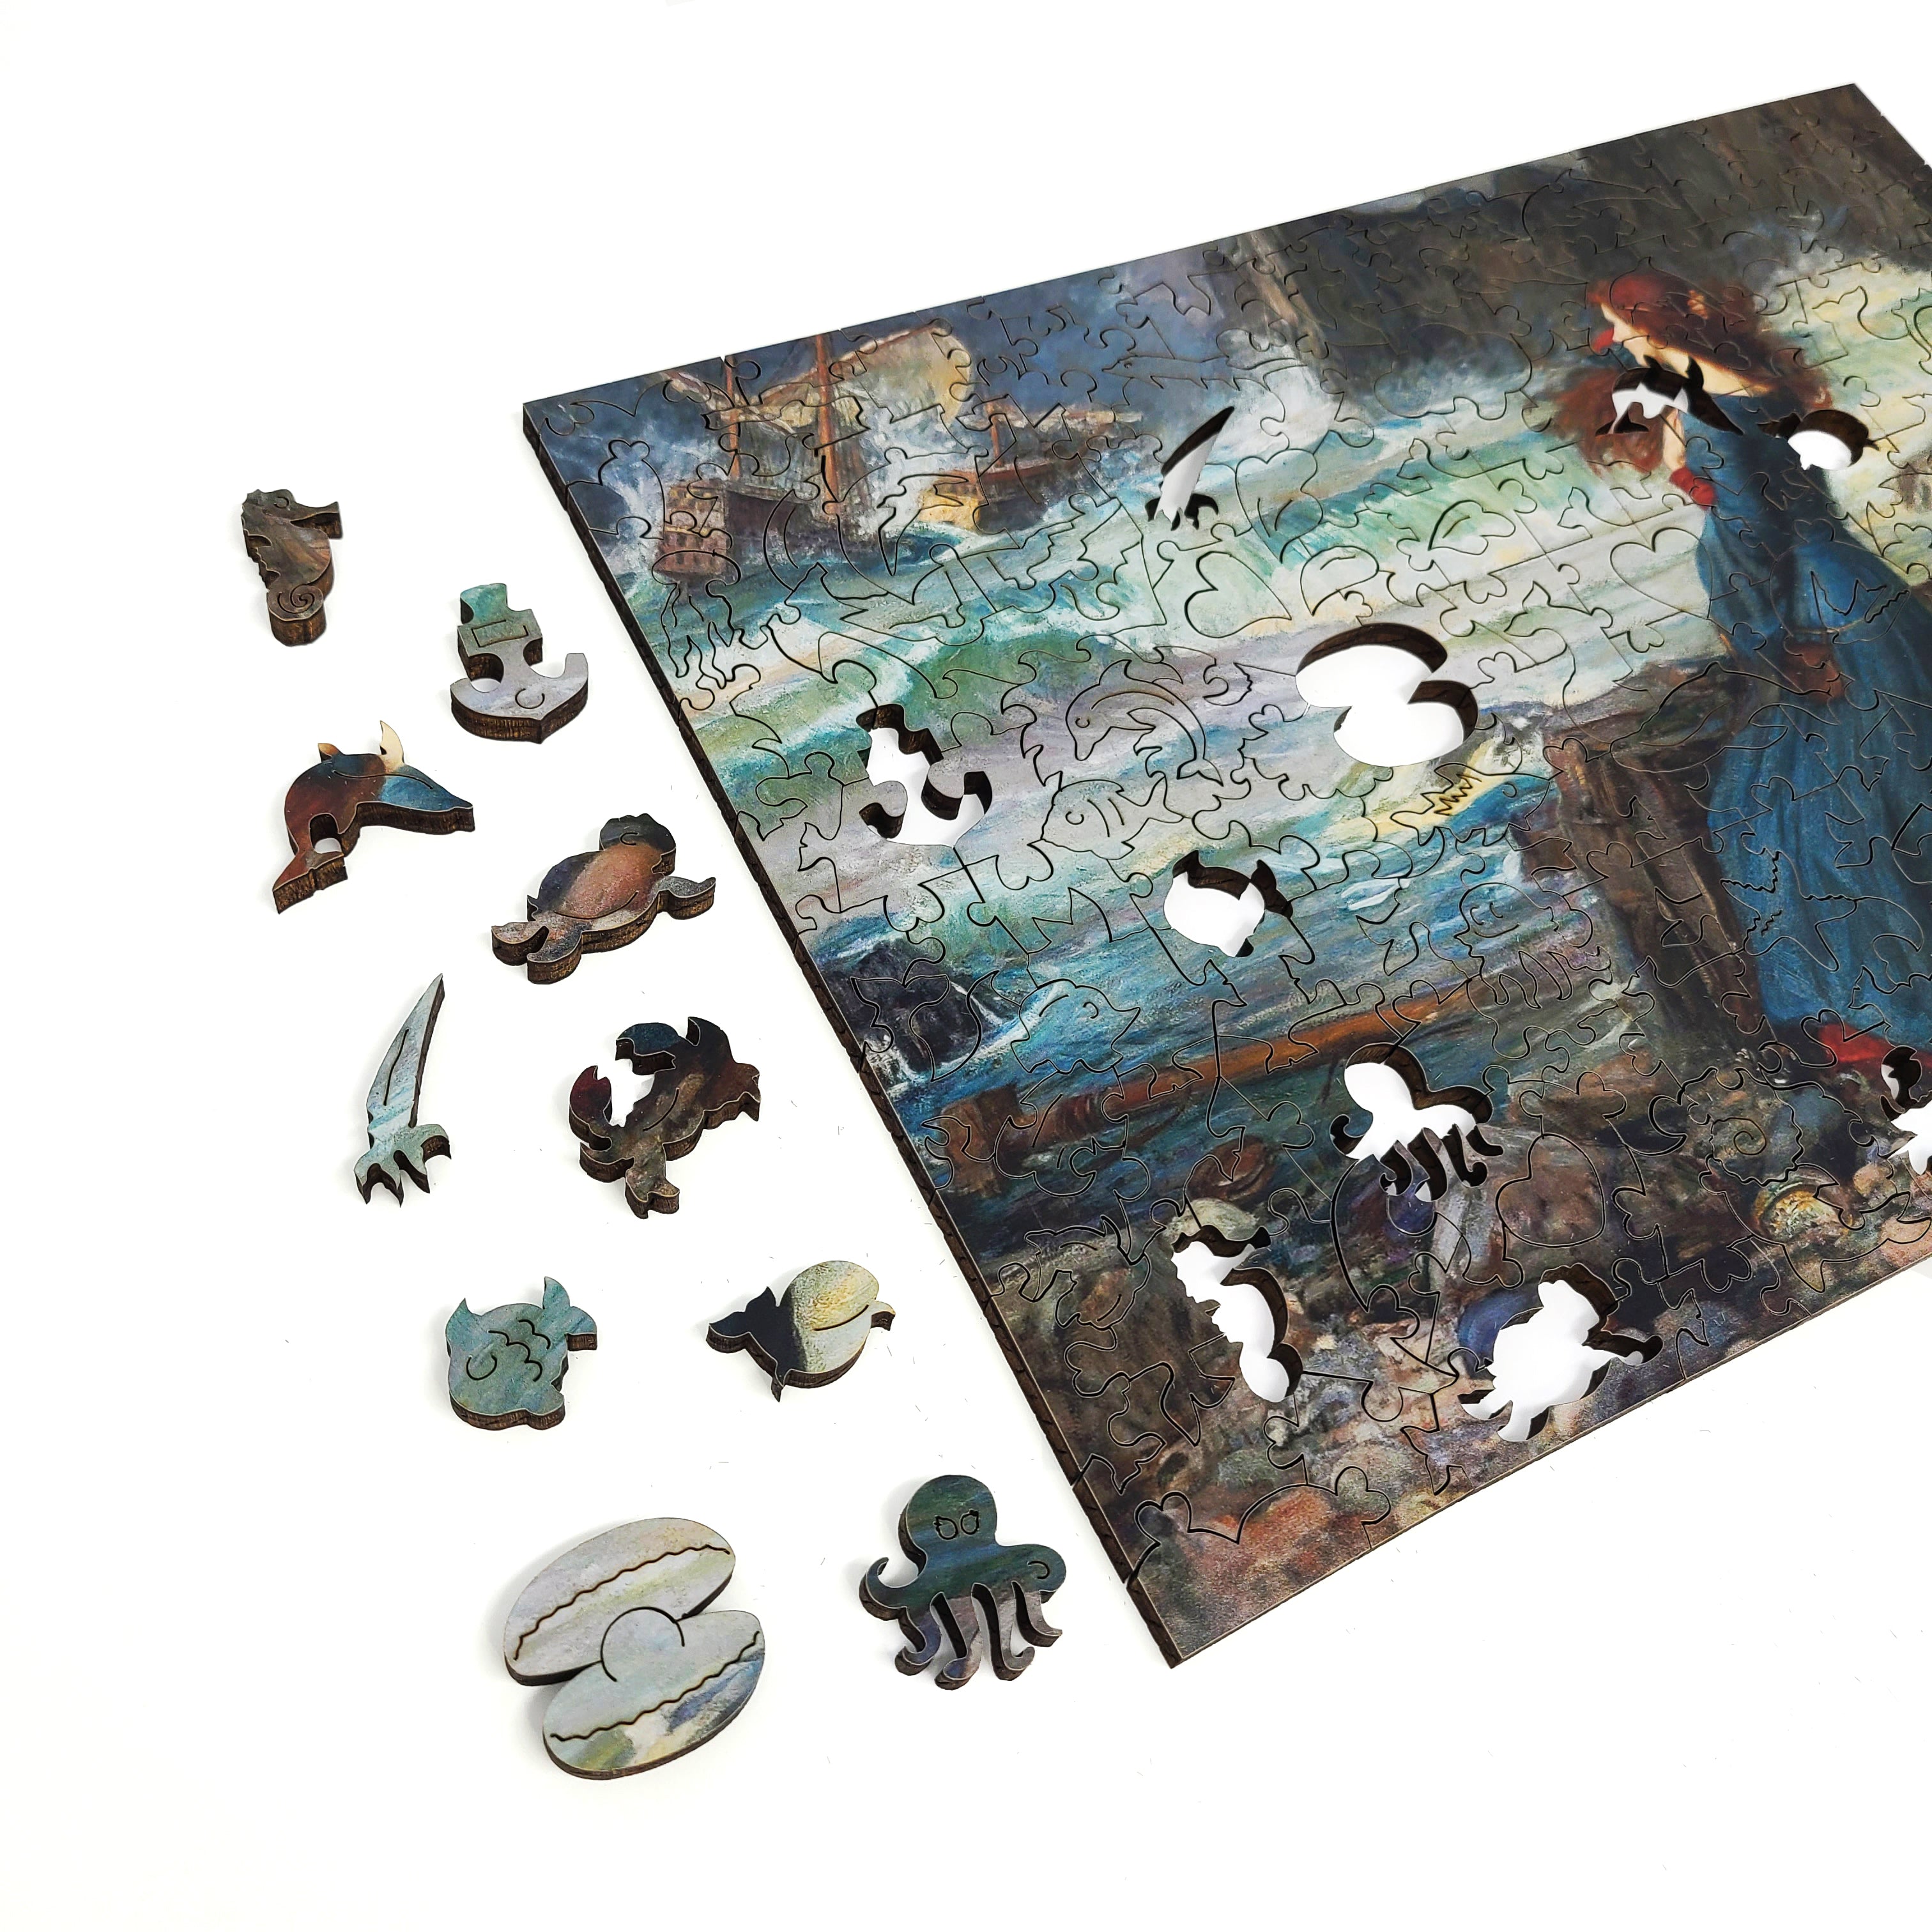 Wooden Jigsaw Puzzle with Uniquely Shaped Pieces for Adults - 206 